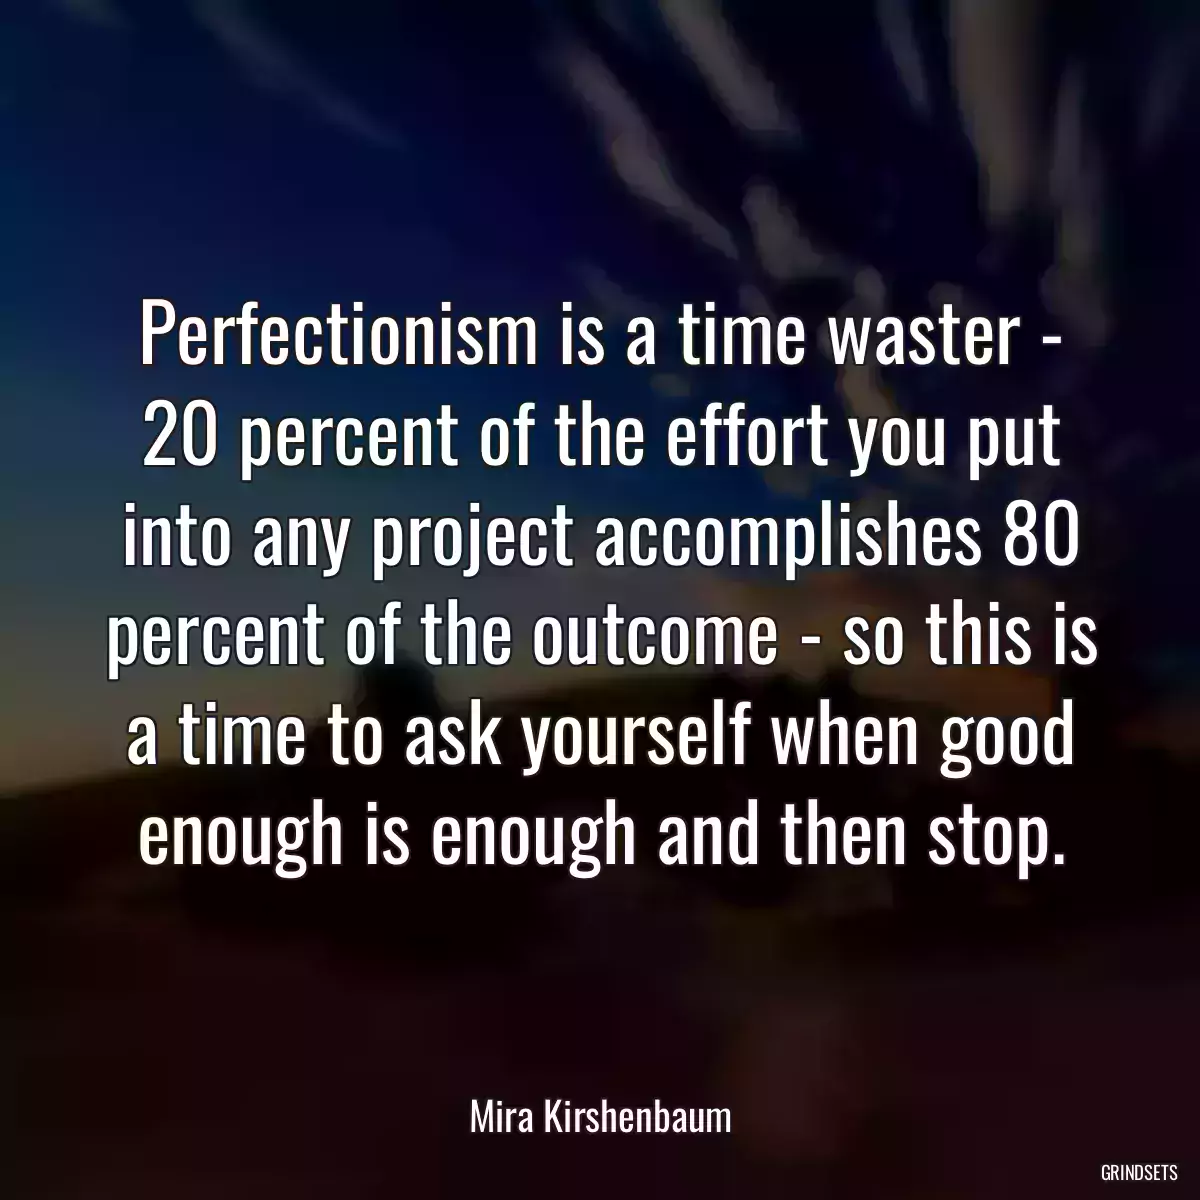 Perfectionism is a time waster - 20 percent of the effort you put into any project accomplishes 80 percent of the outcome - so this is a time to ask yourself when good enough is enough and then stop.